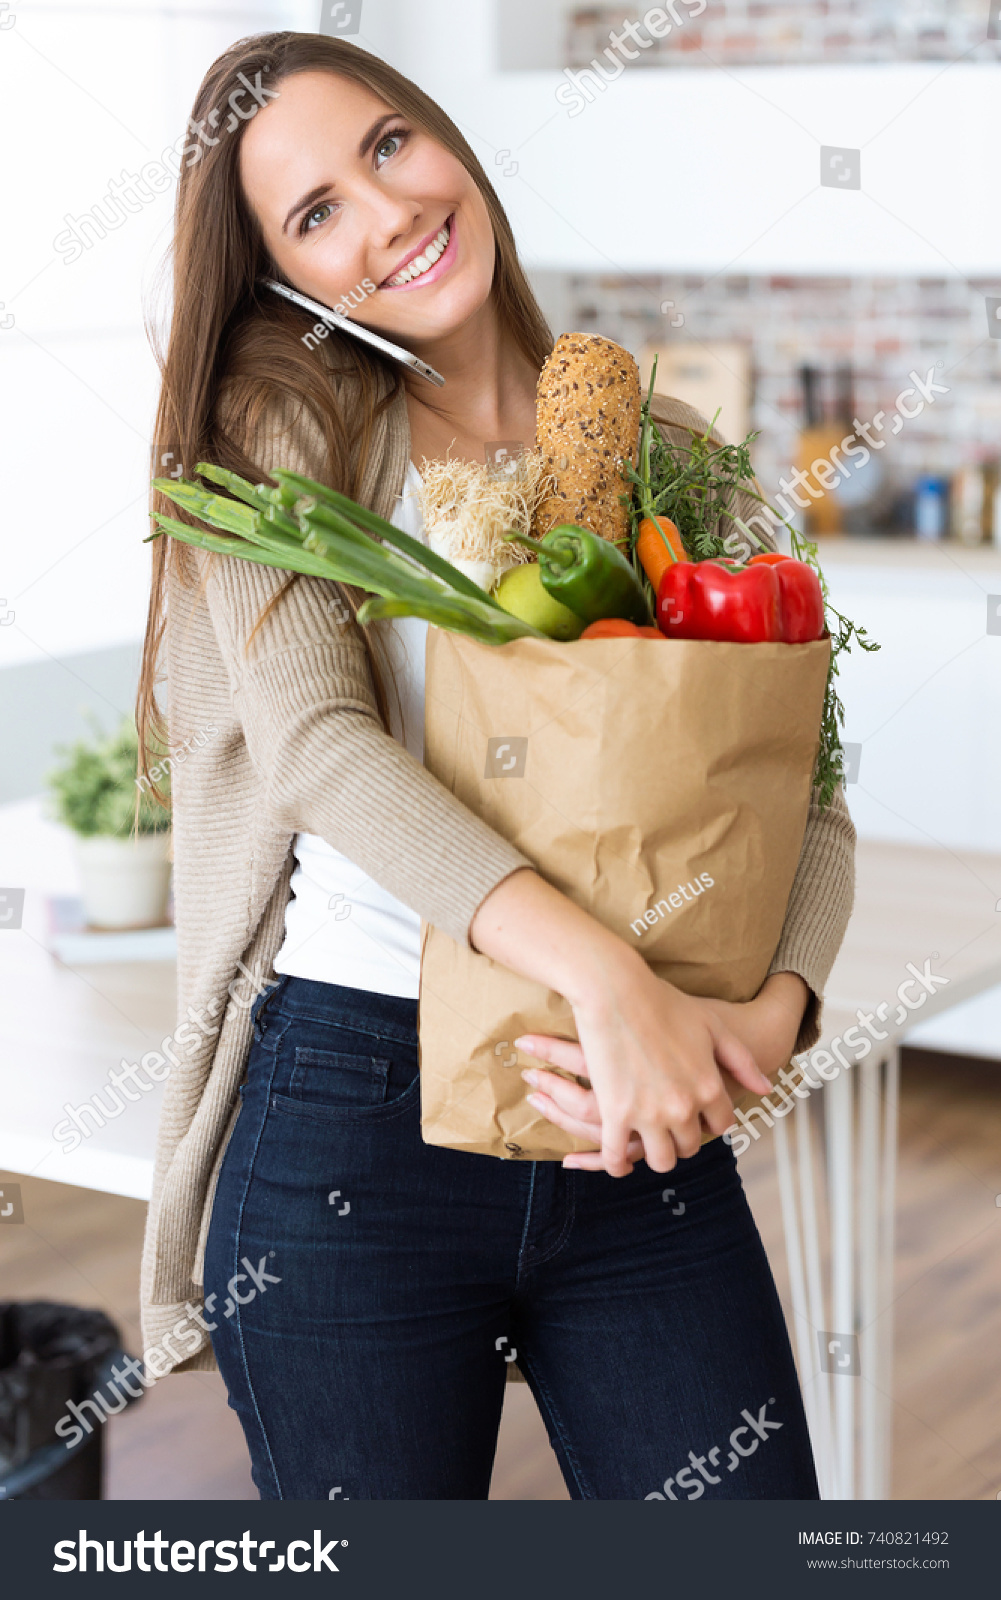 Portrait of beautiful young woman with vegetables in grocery bag at home. #740821492